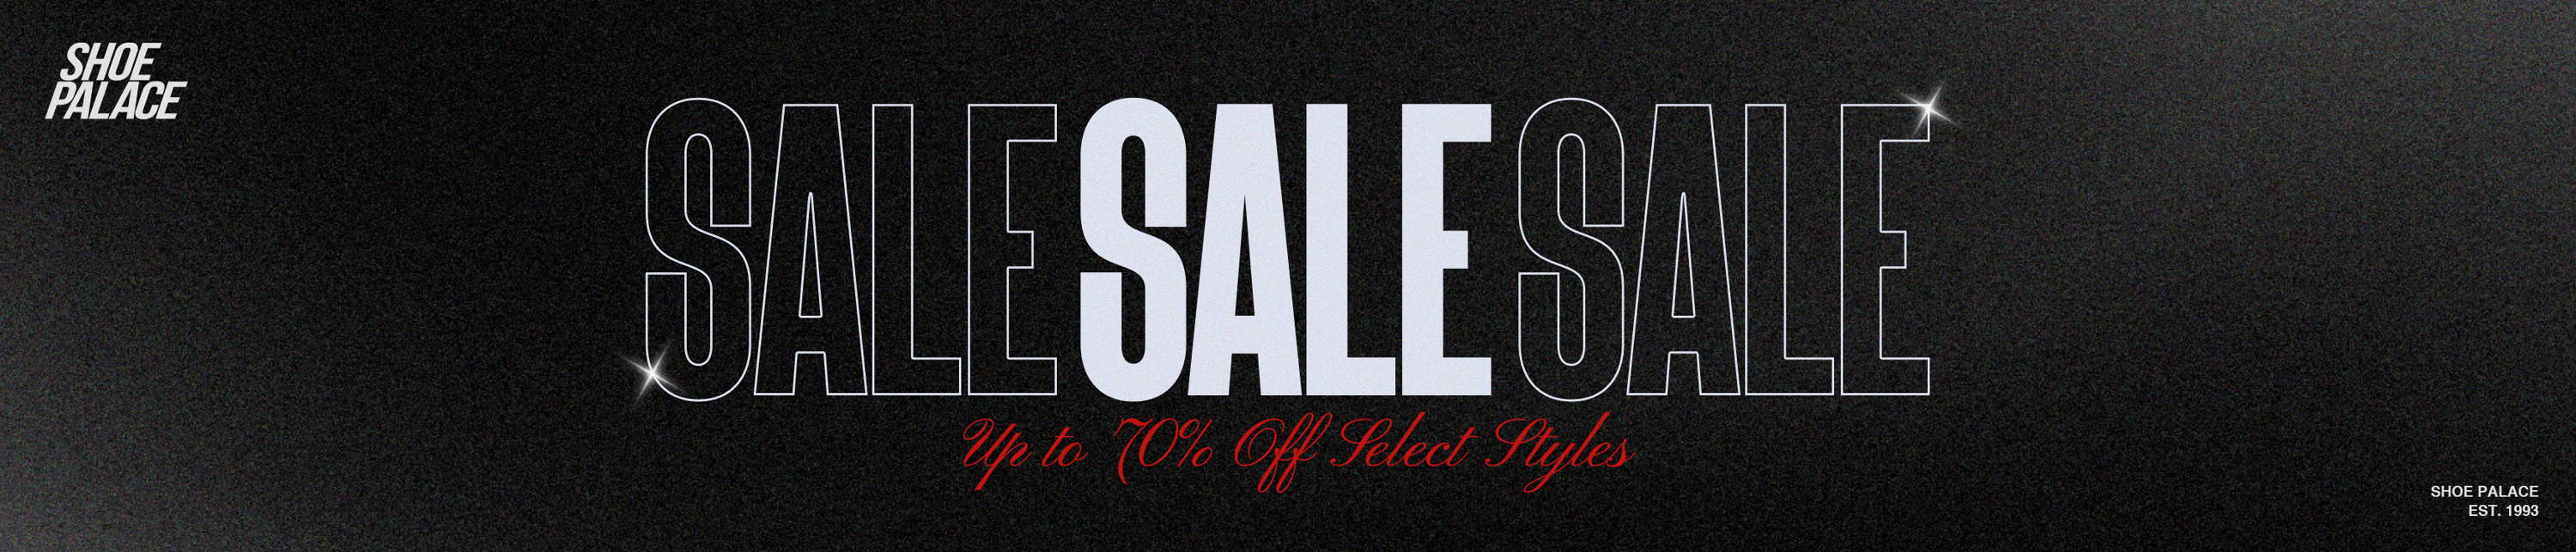 end of year sale up to 70%